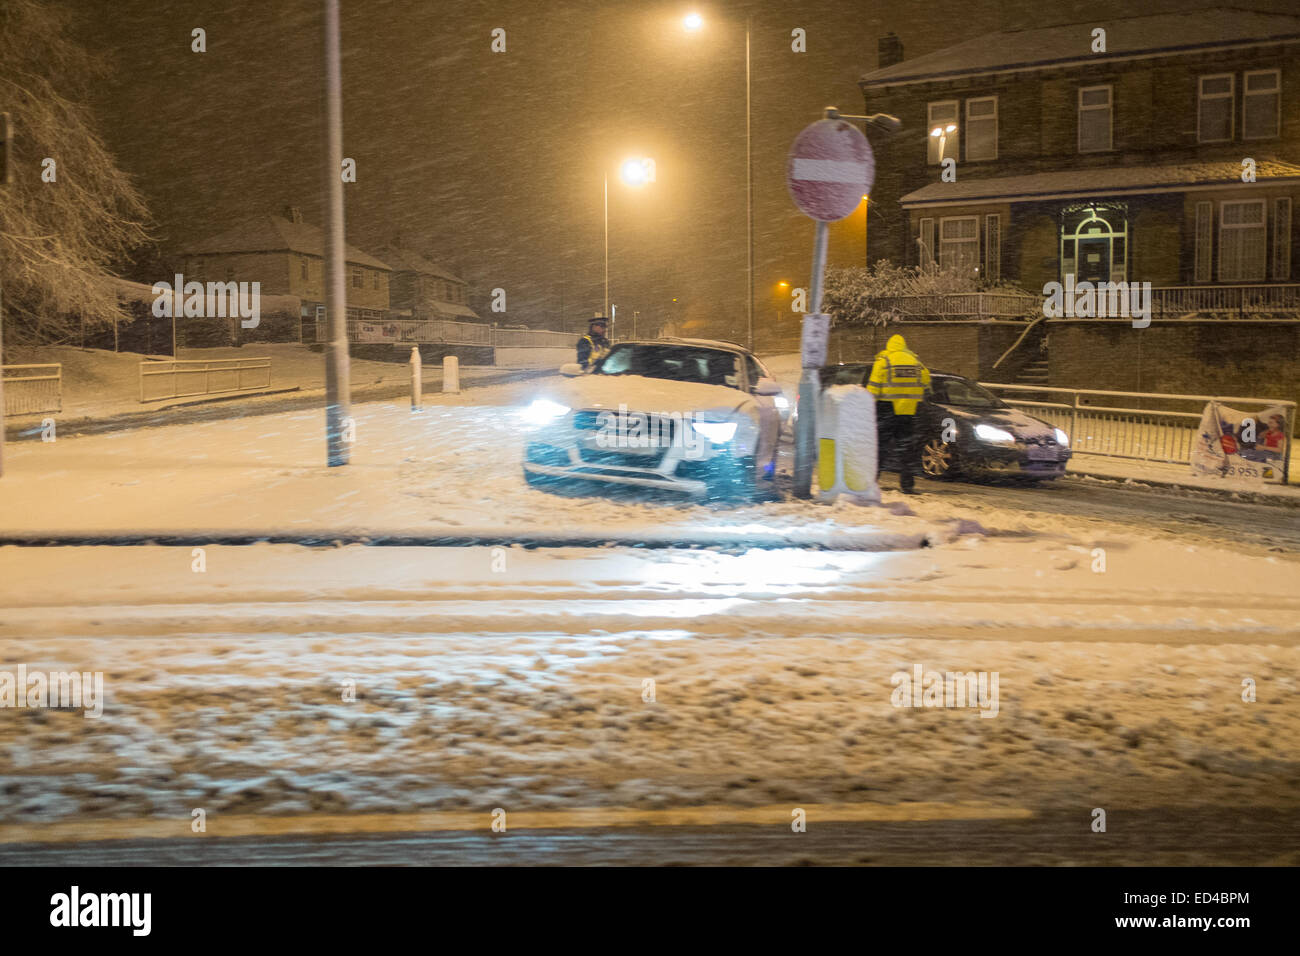 Road traffic accident in heavy snow fall. car skids into street sign Stock Photo